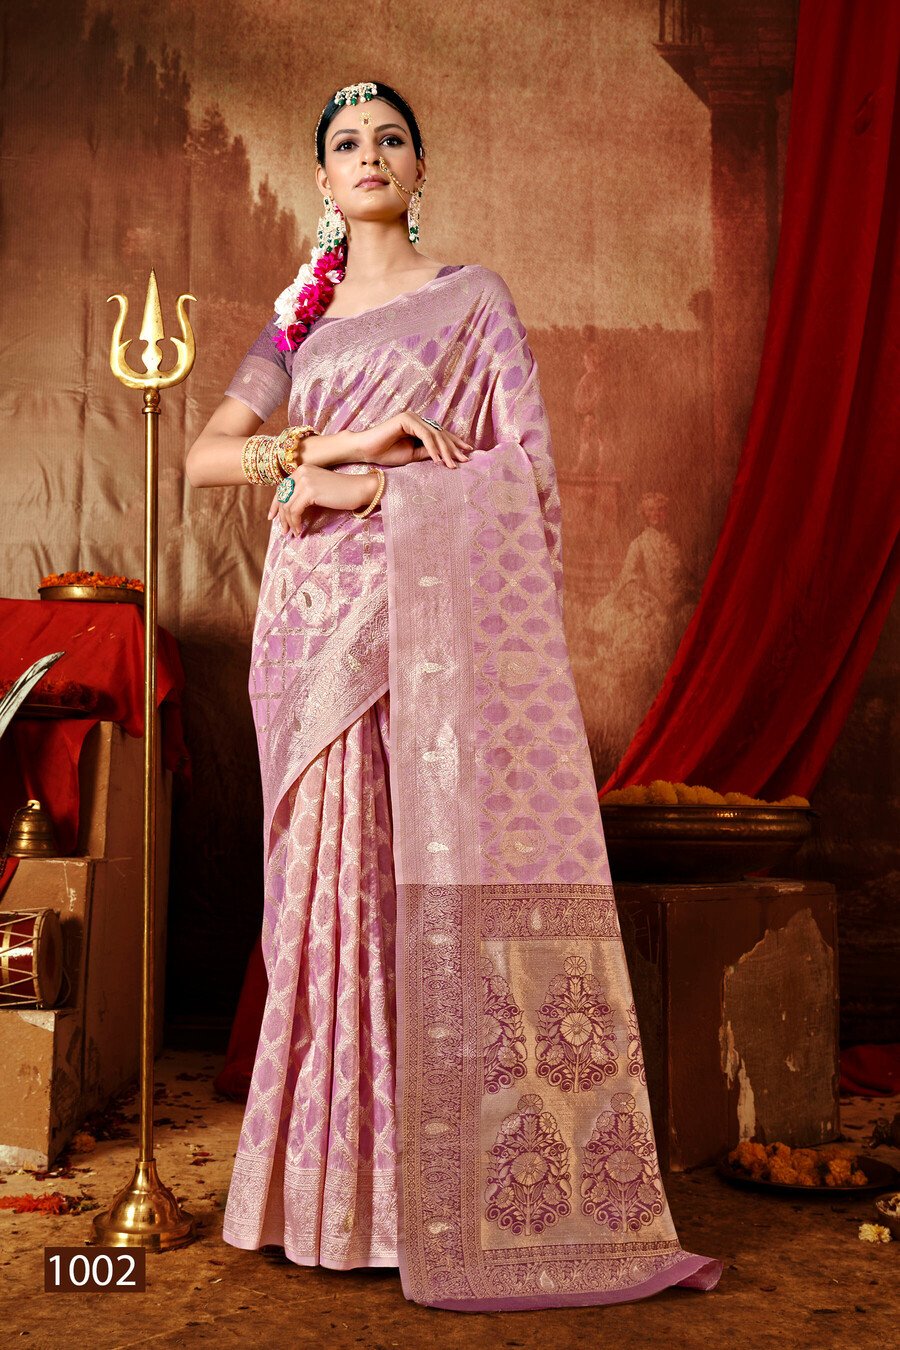 Saree Wholesalers And Suppliers For Online Business - Advantages